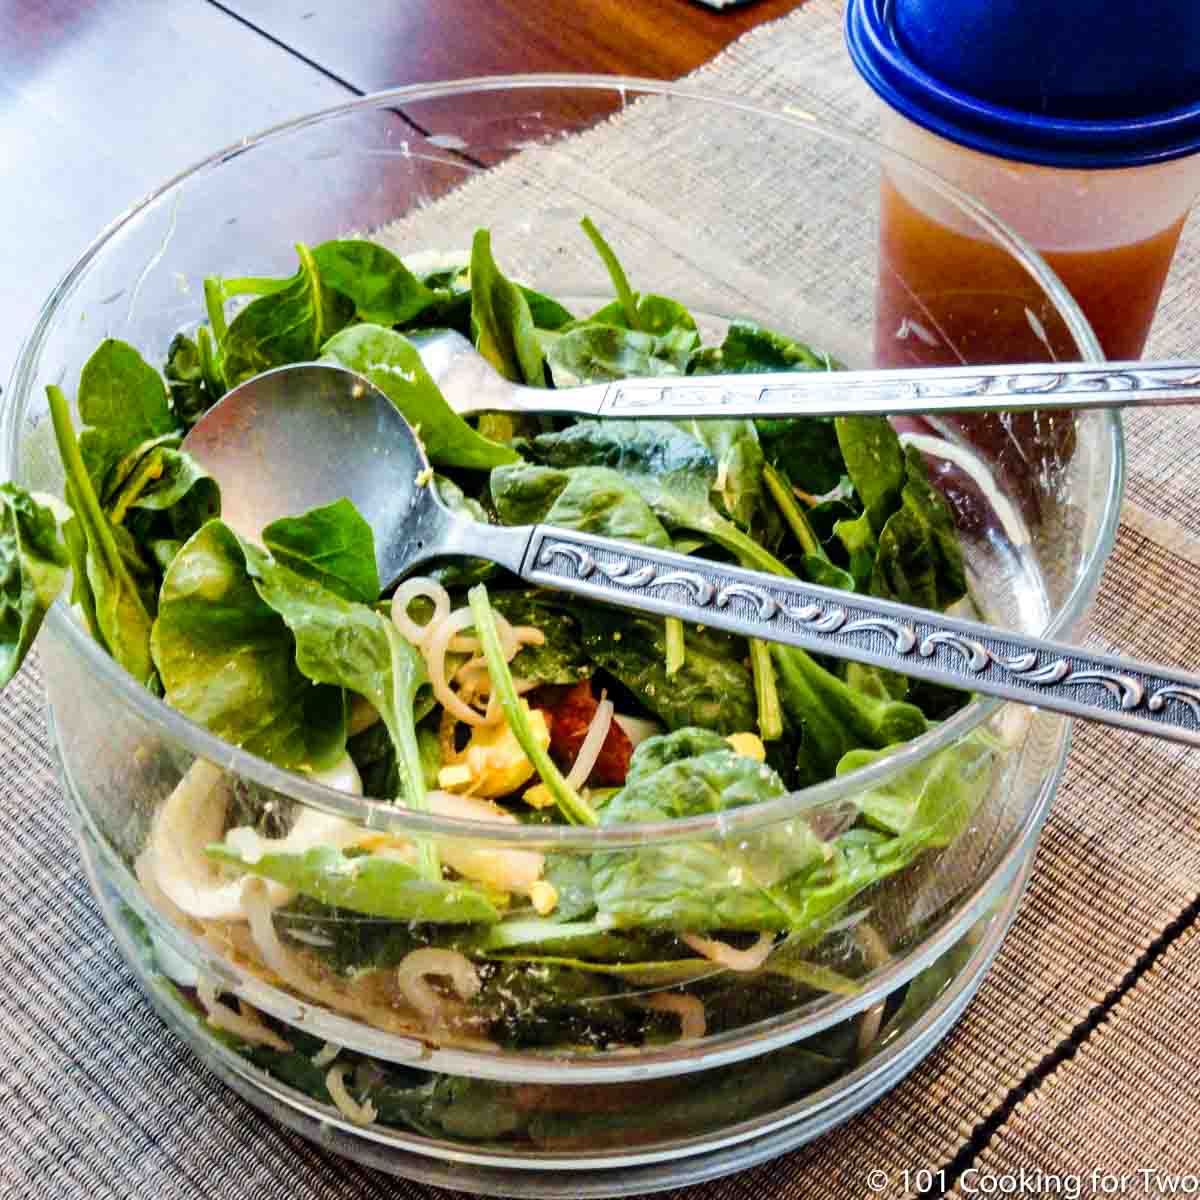 bowl of spinach salad with dressing in shaker